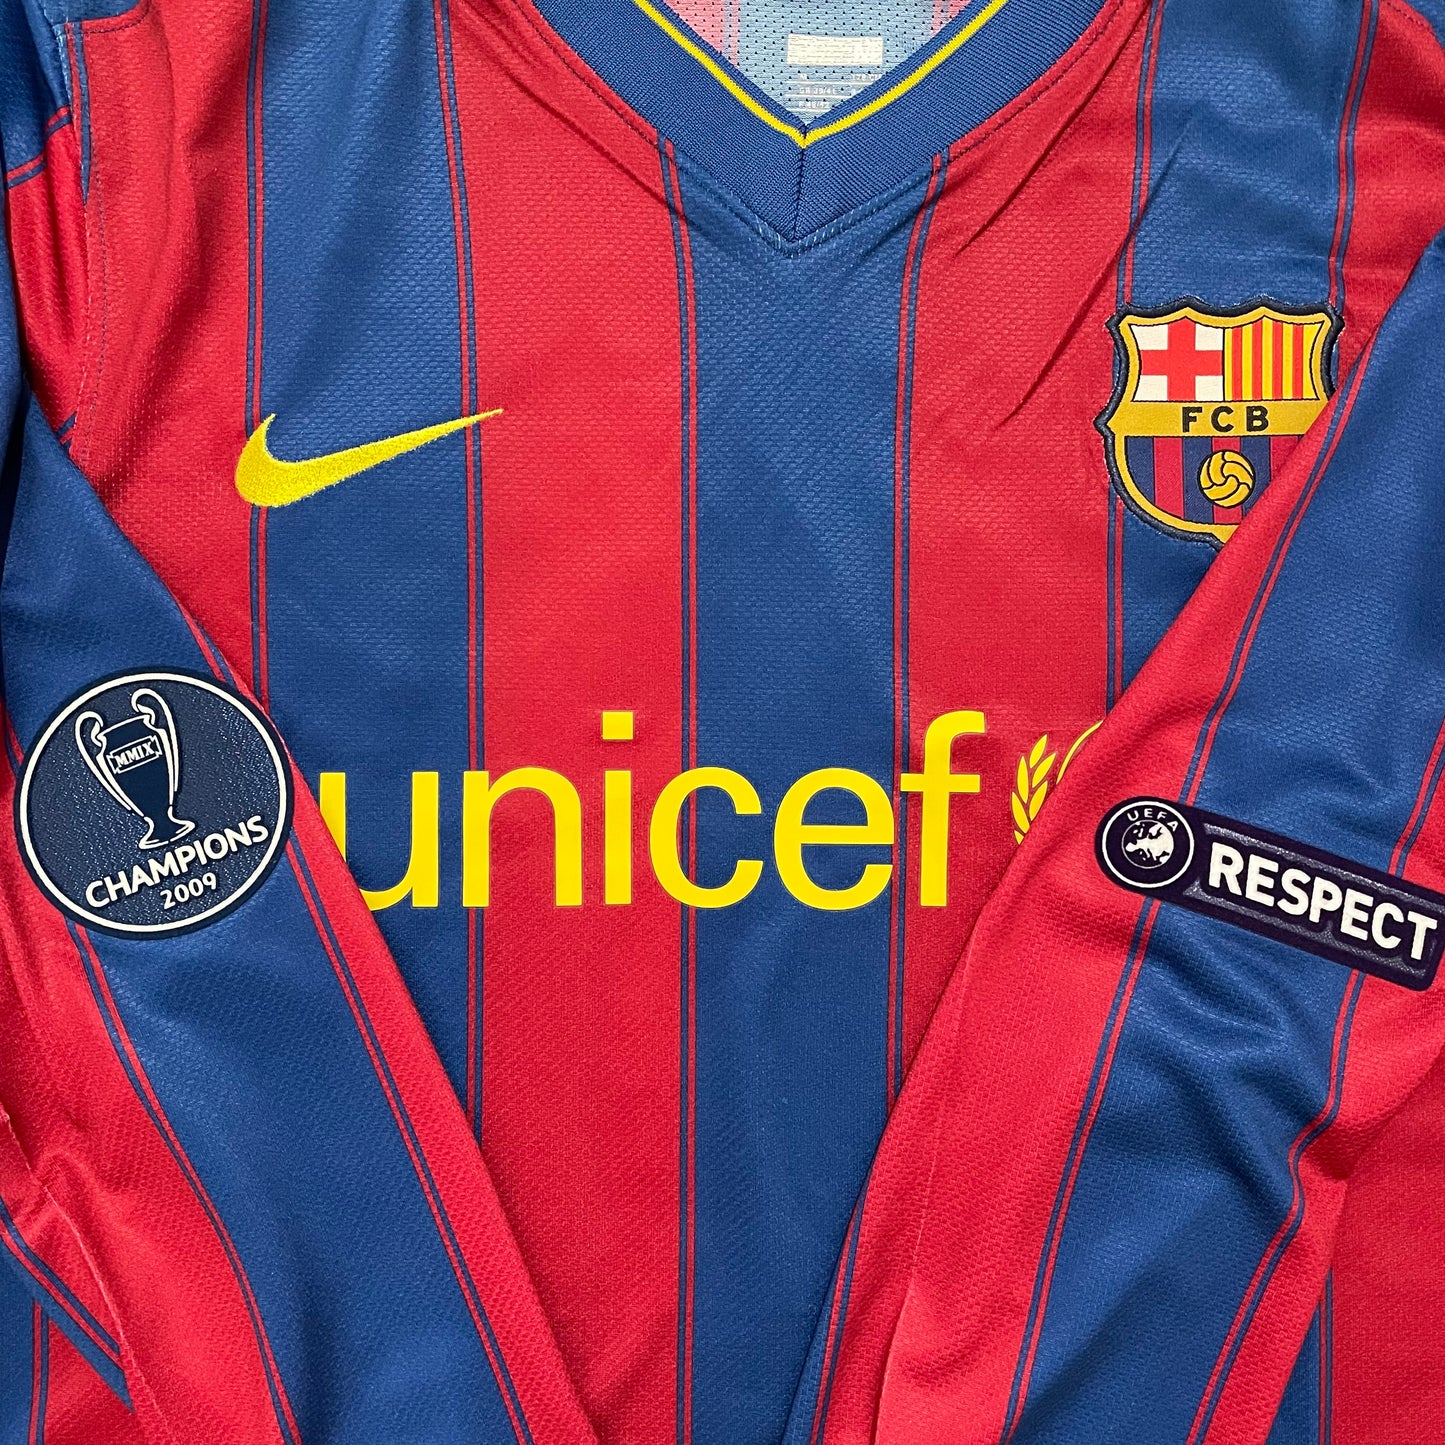 2009-2010 FC Barcelona Player Issue home shirt #10 Messi (M)